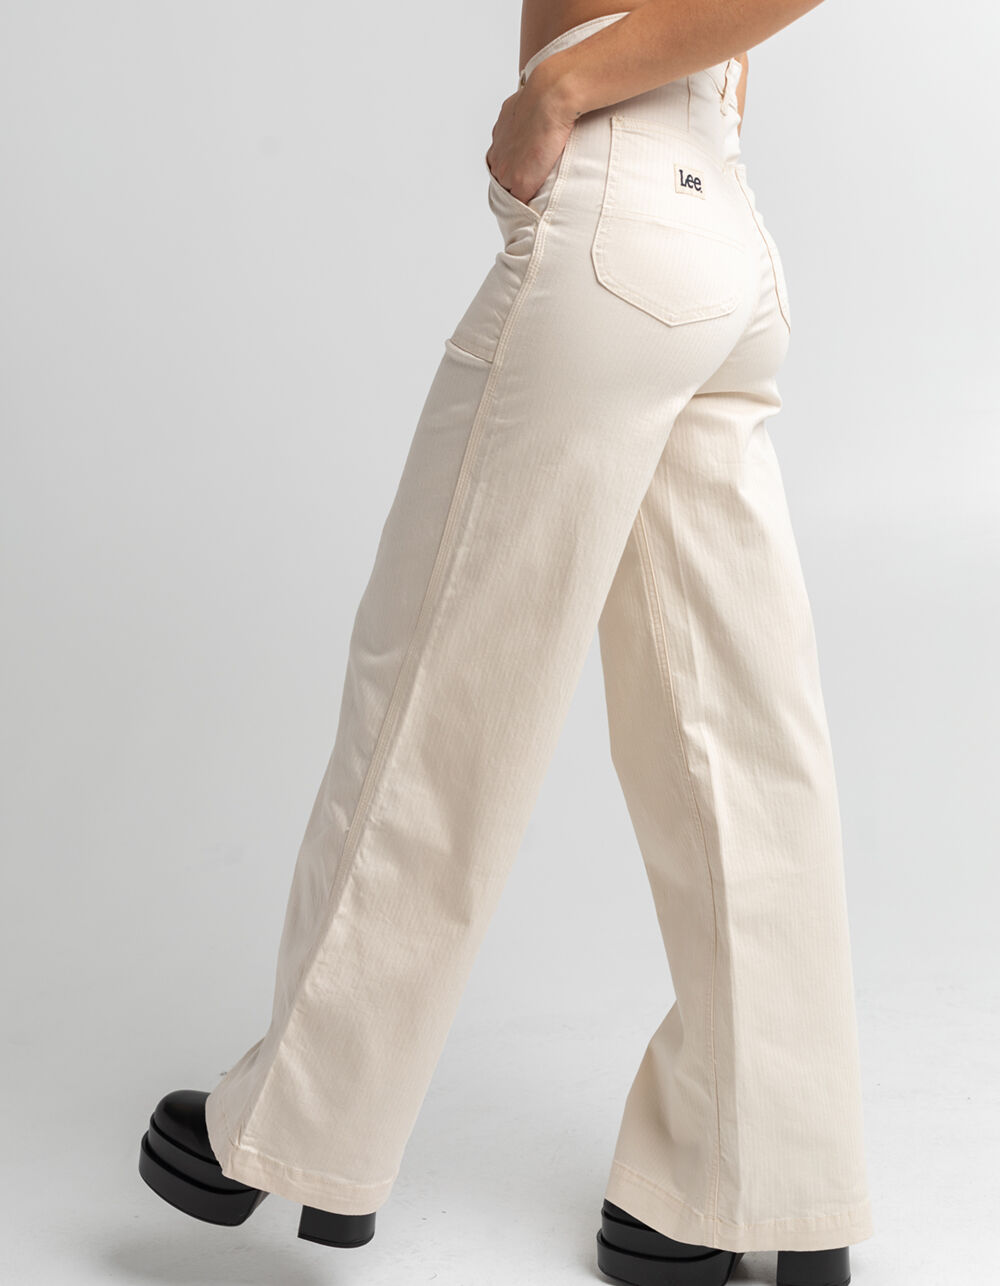 Aggregate 80+ lee trouser pants - in.cdgdbentre